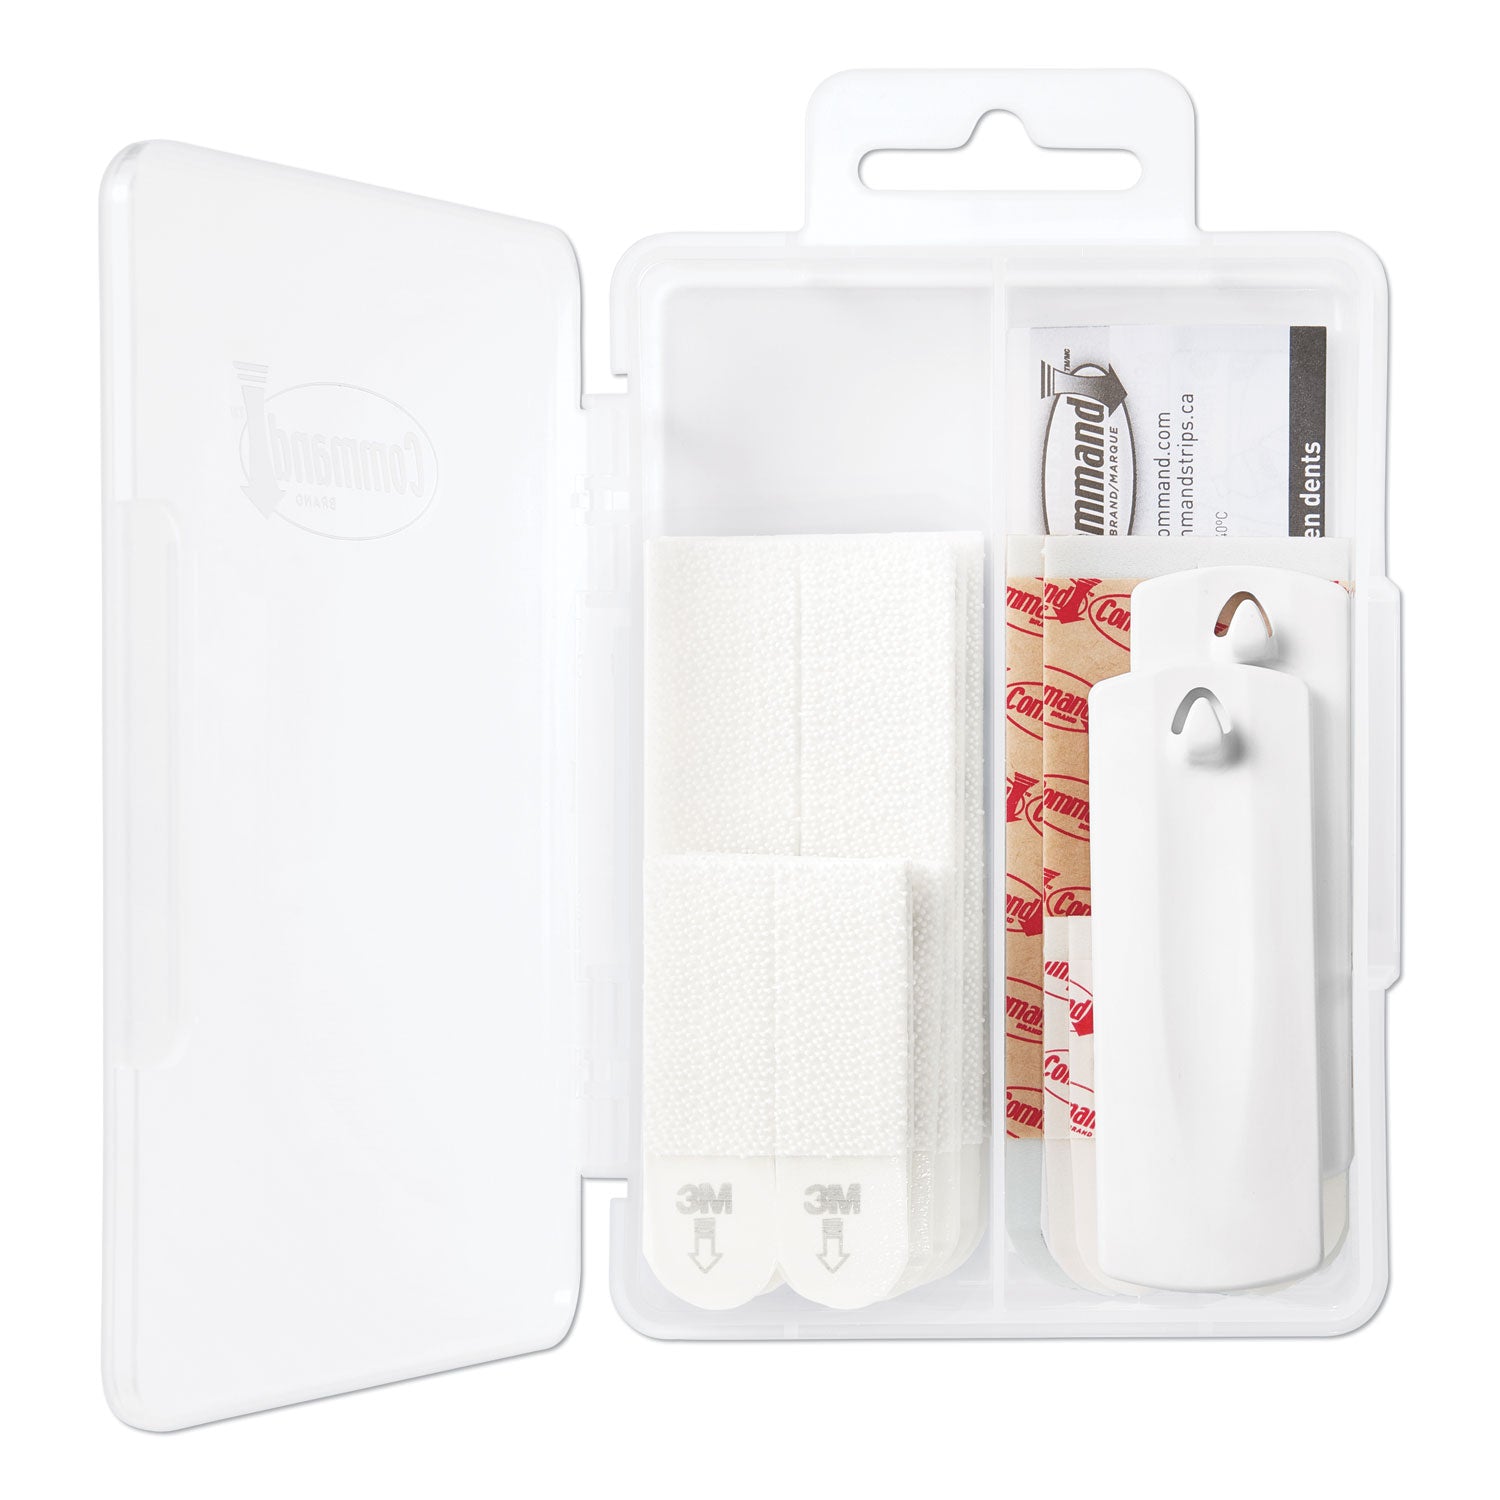 picture-hanging-kit-assorted-sizes-plastic-white-1-lb;-4-lb-capacities-24-pieces-pack_mmm17221es - 2